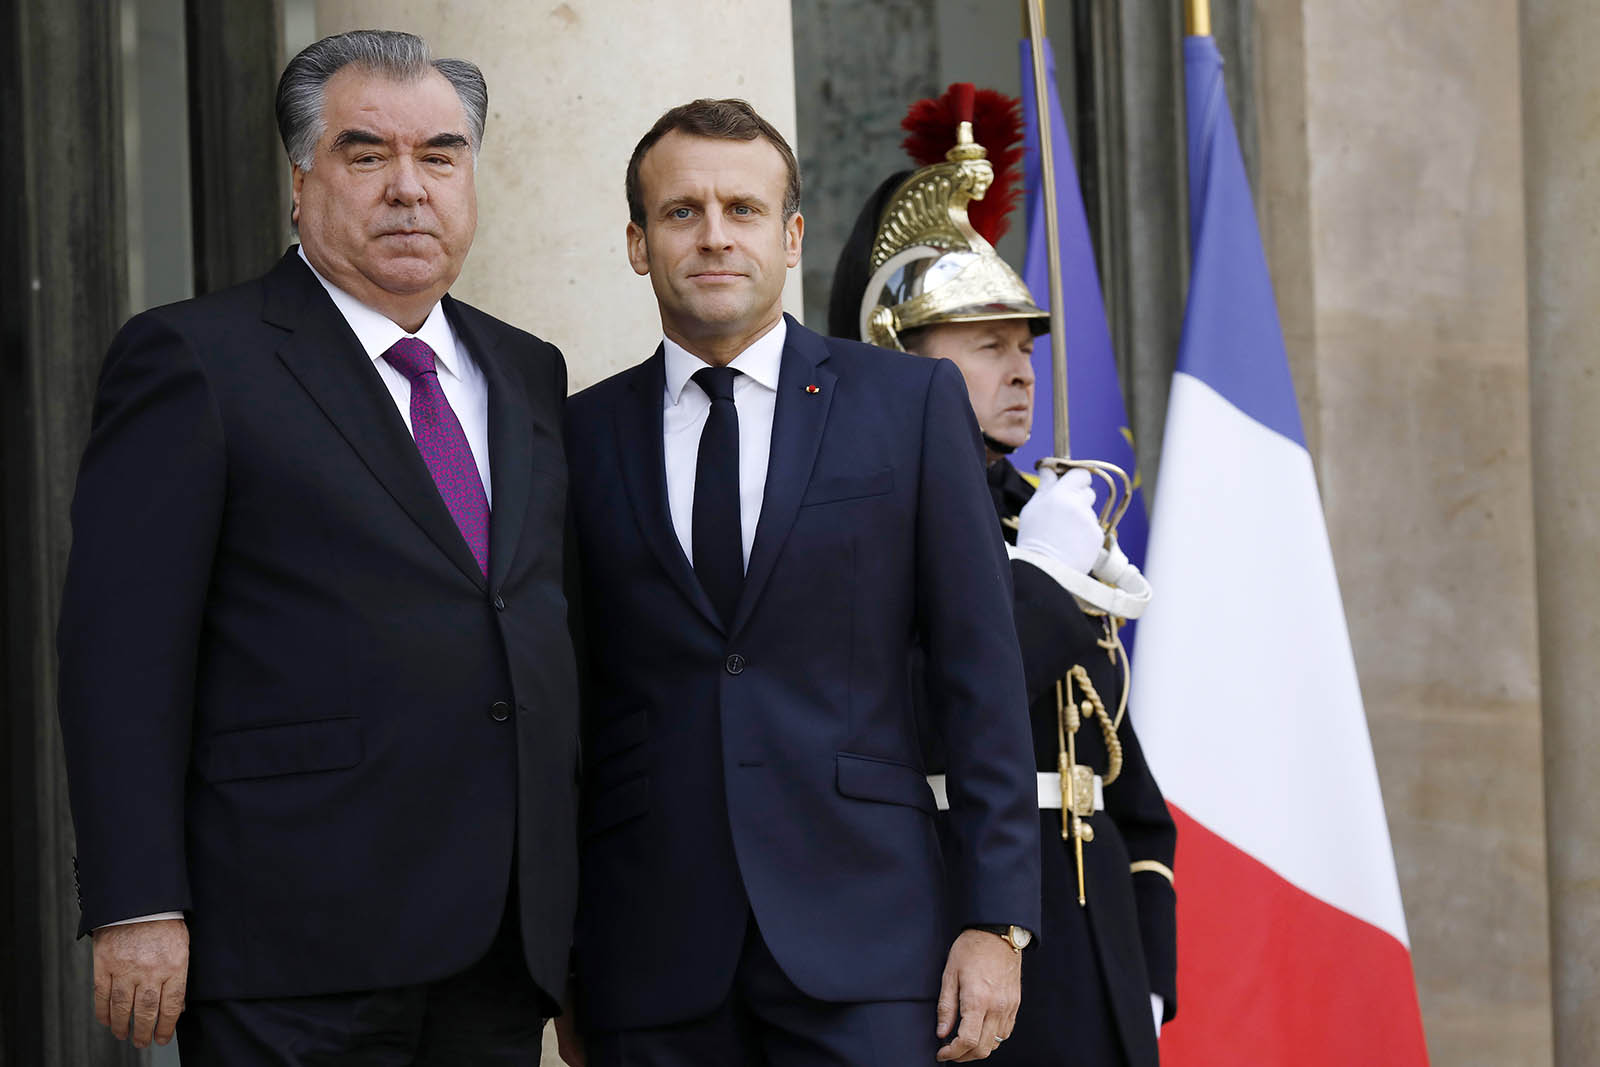 French President Emmanuel Macron, right, is pictured with President of Tajikistan, Emomali Rahmon, at the Elysee Palace in Paris, France, in November 2019.